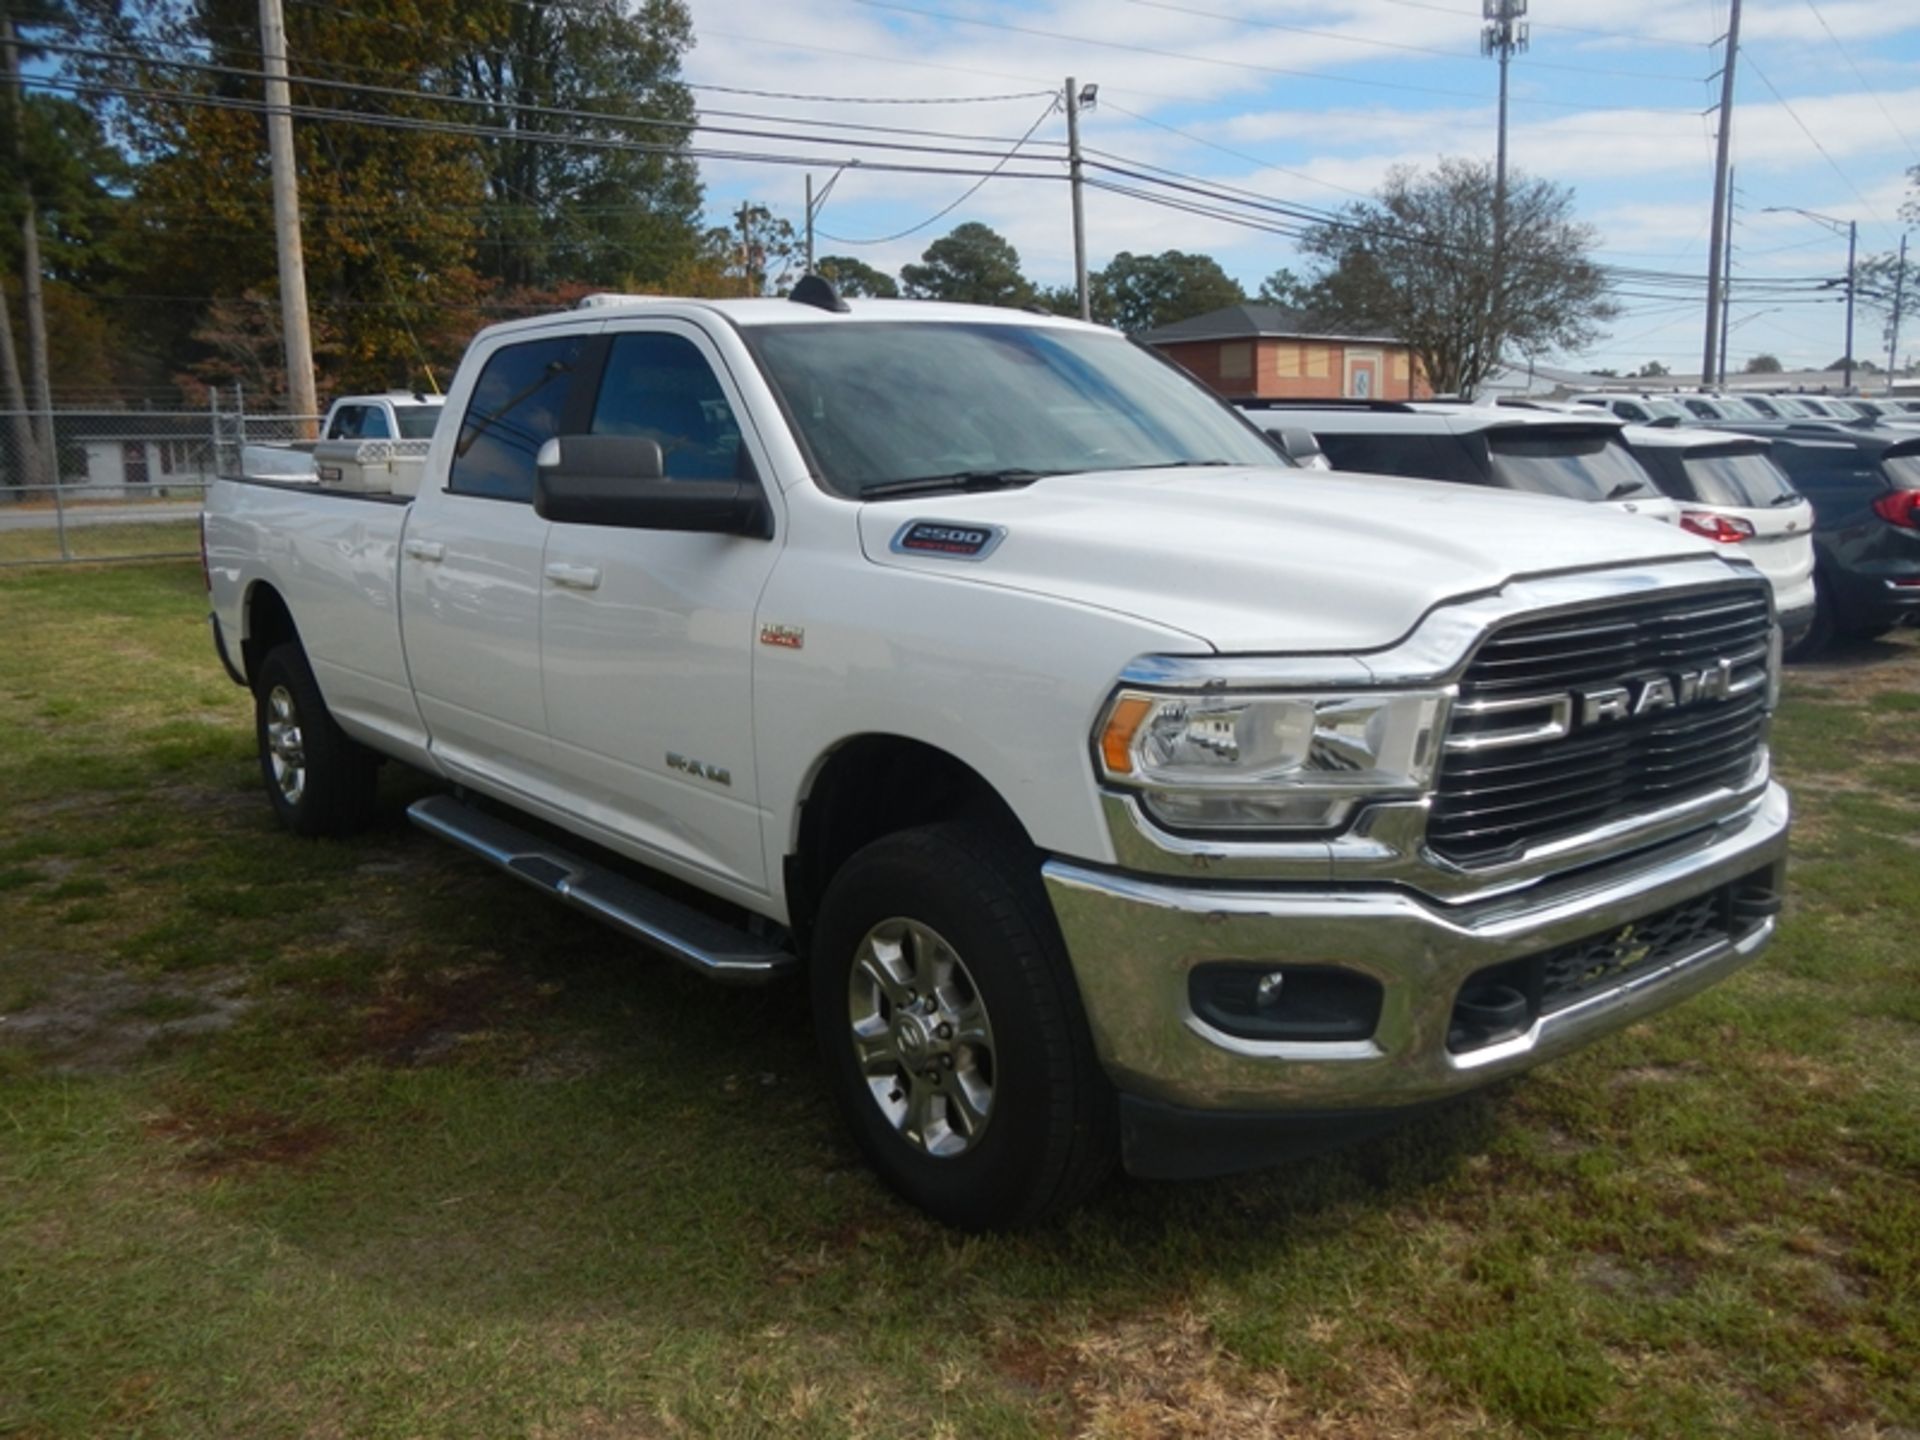 2021 RAM 2500 6.4L Hemi gas, crew cab, long bed, 4wd, Big Horn trim package dent in side of bed - - Bild 2 aus 8